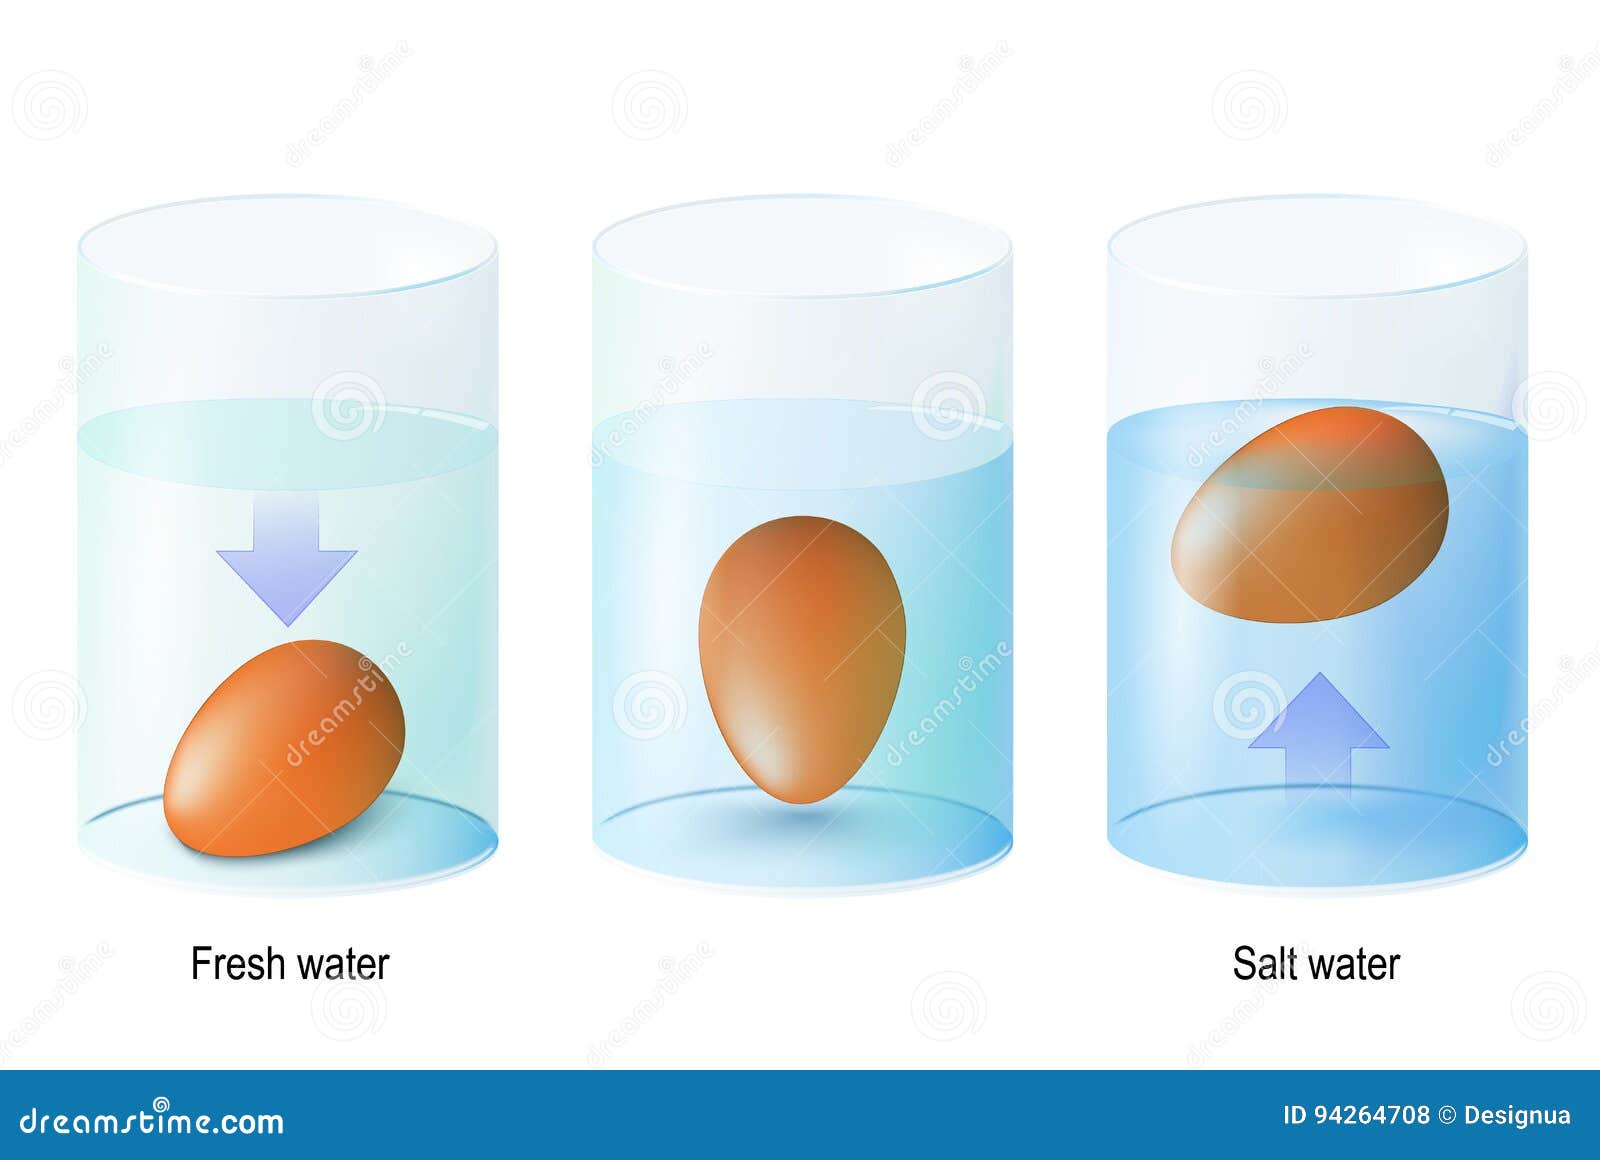 test egg. science experiments and test eggs for freshness in one